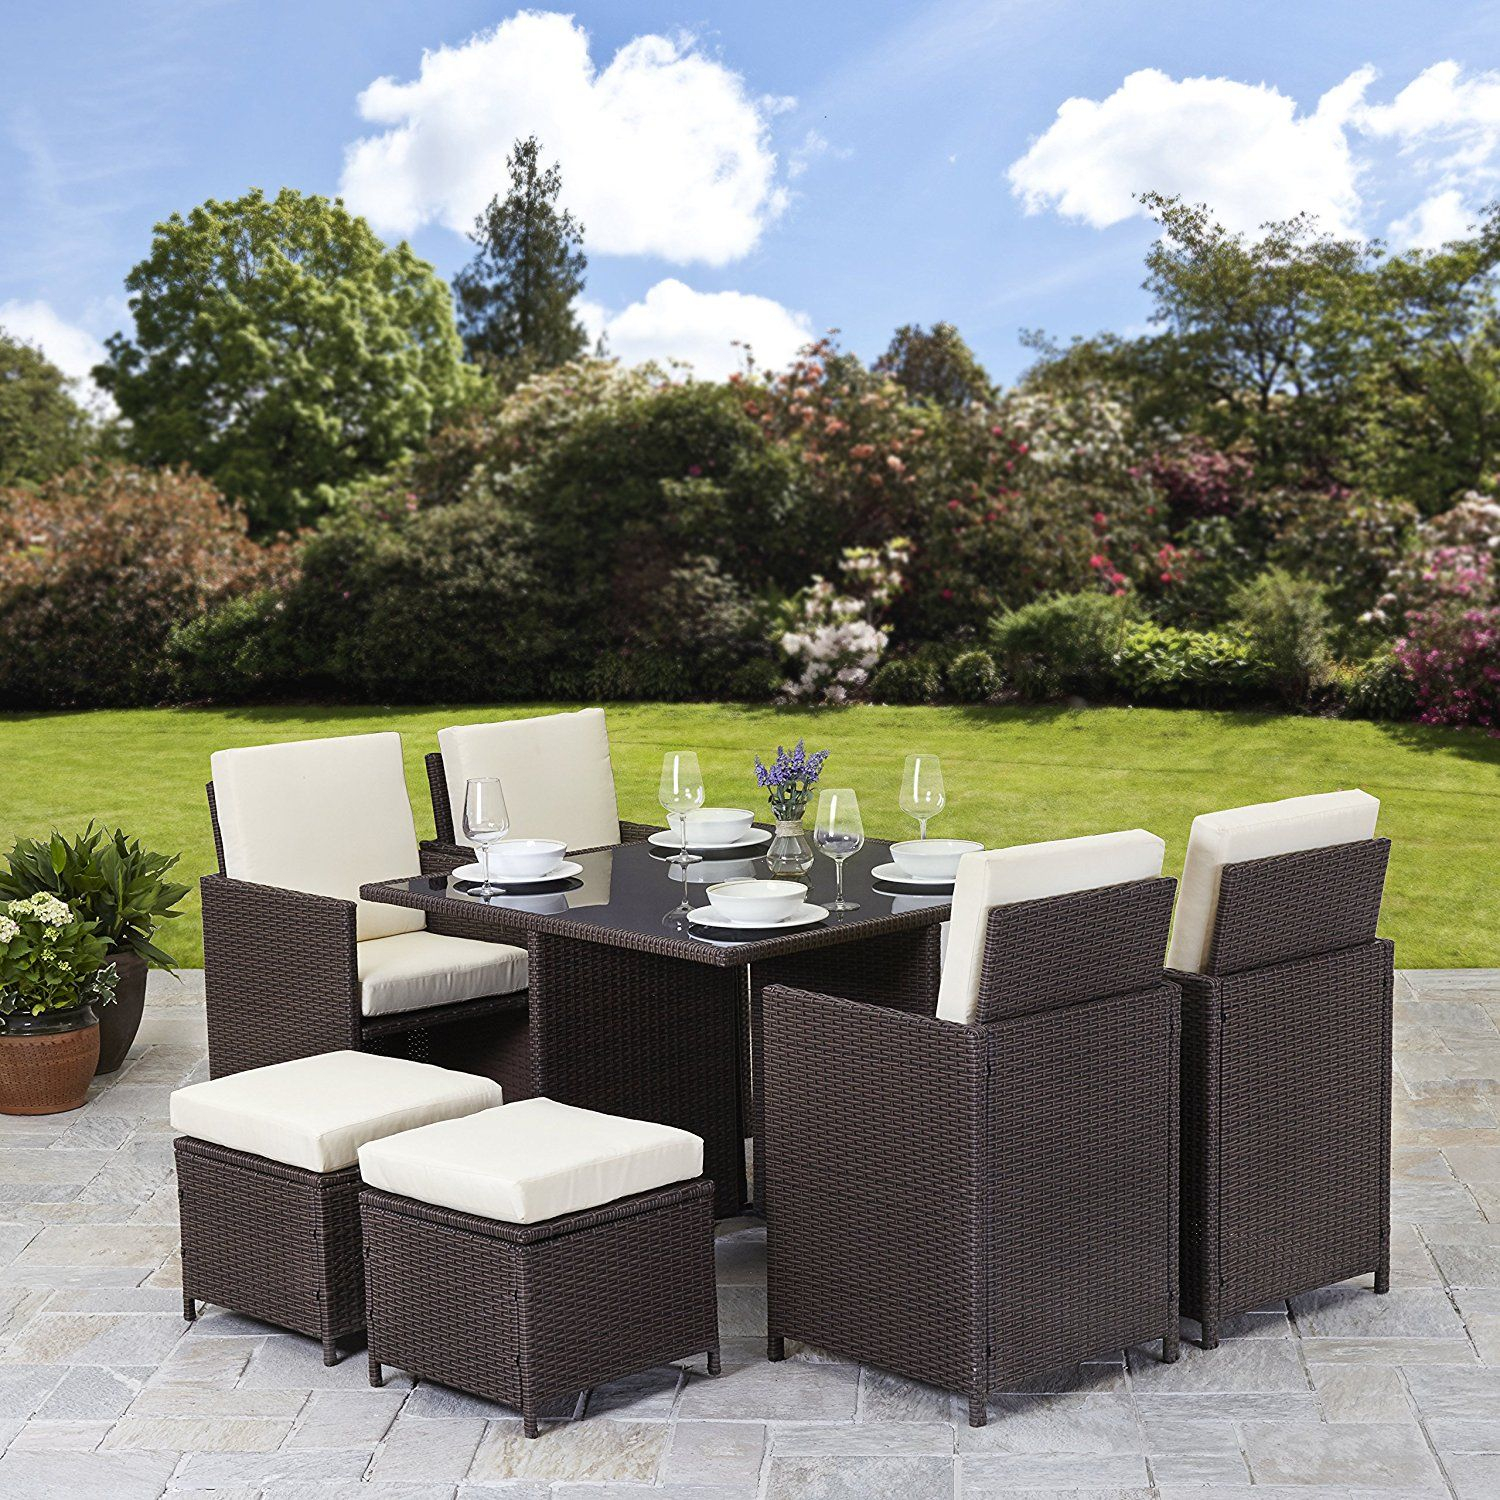 Rattan Cube Garden Furniture Set 8 Seater Outdoor Wicker throughout proportions 1500 X 1500